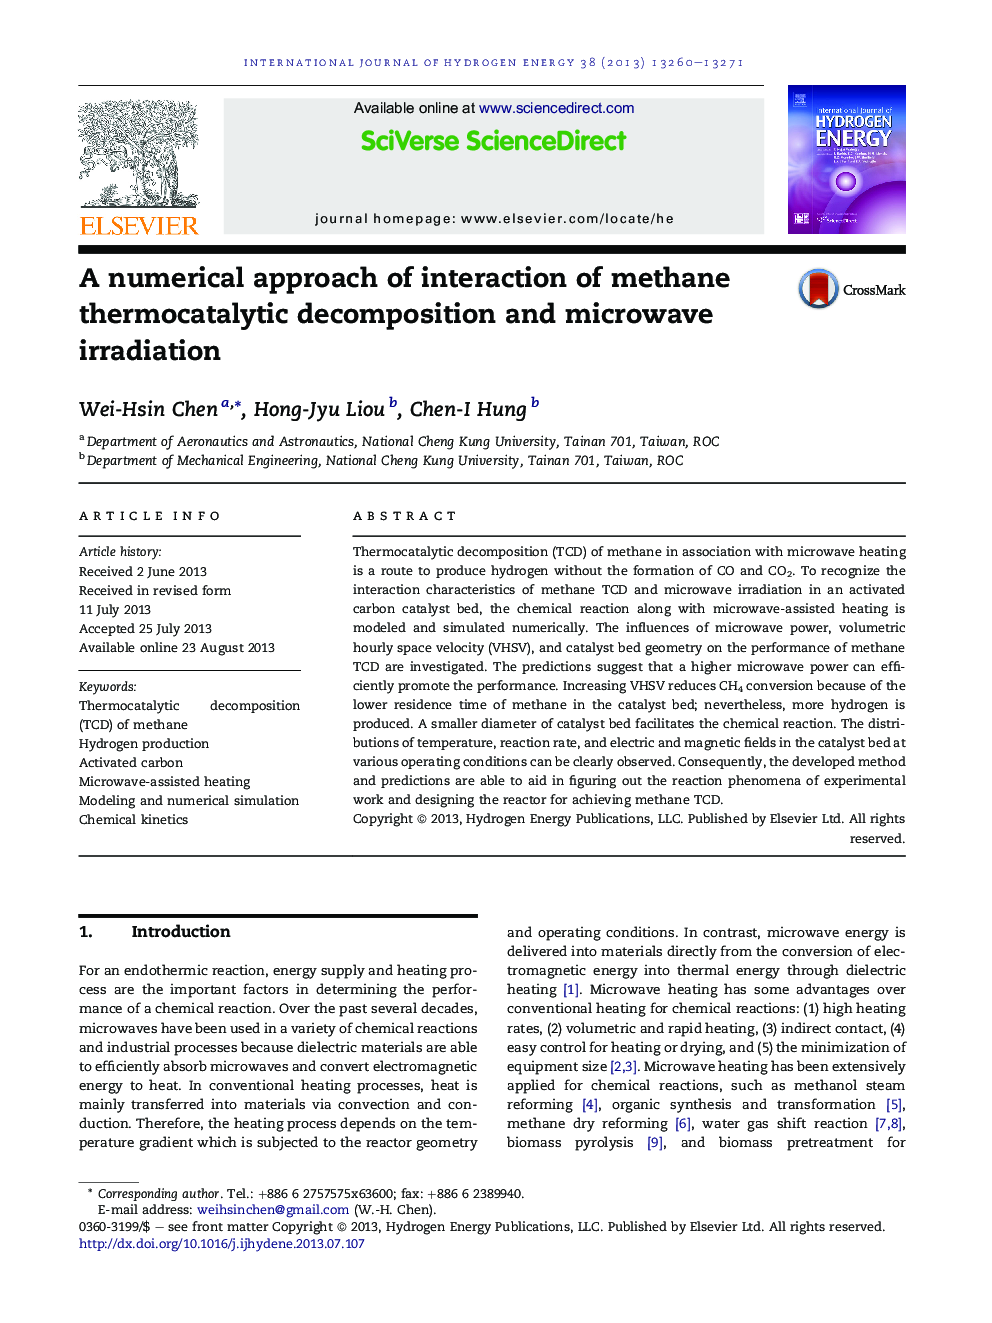 A numerical approach of interaction of methane thermocatalytic decomposition and microwave irradiation